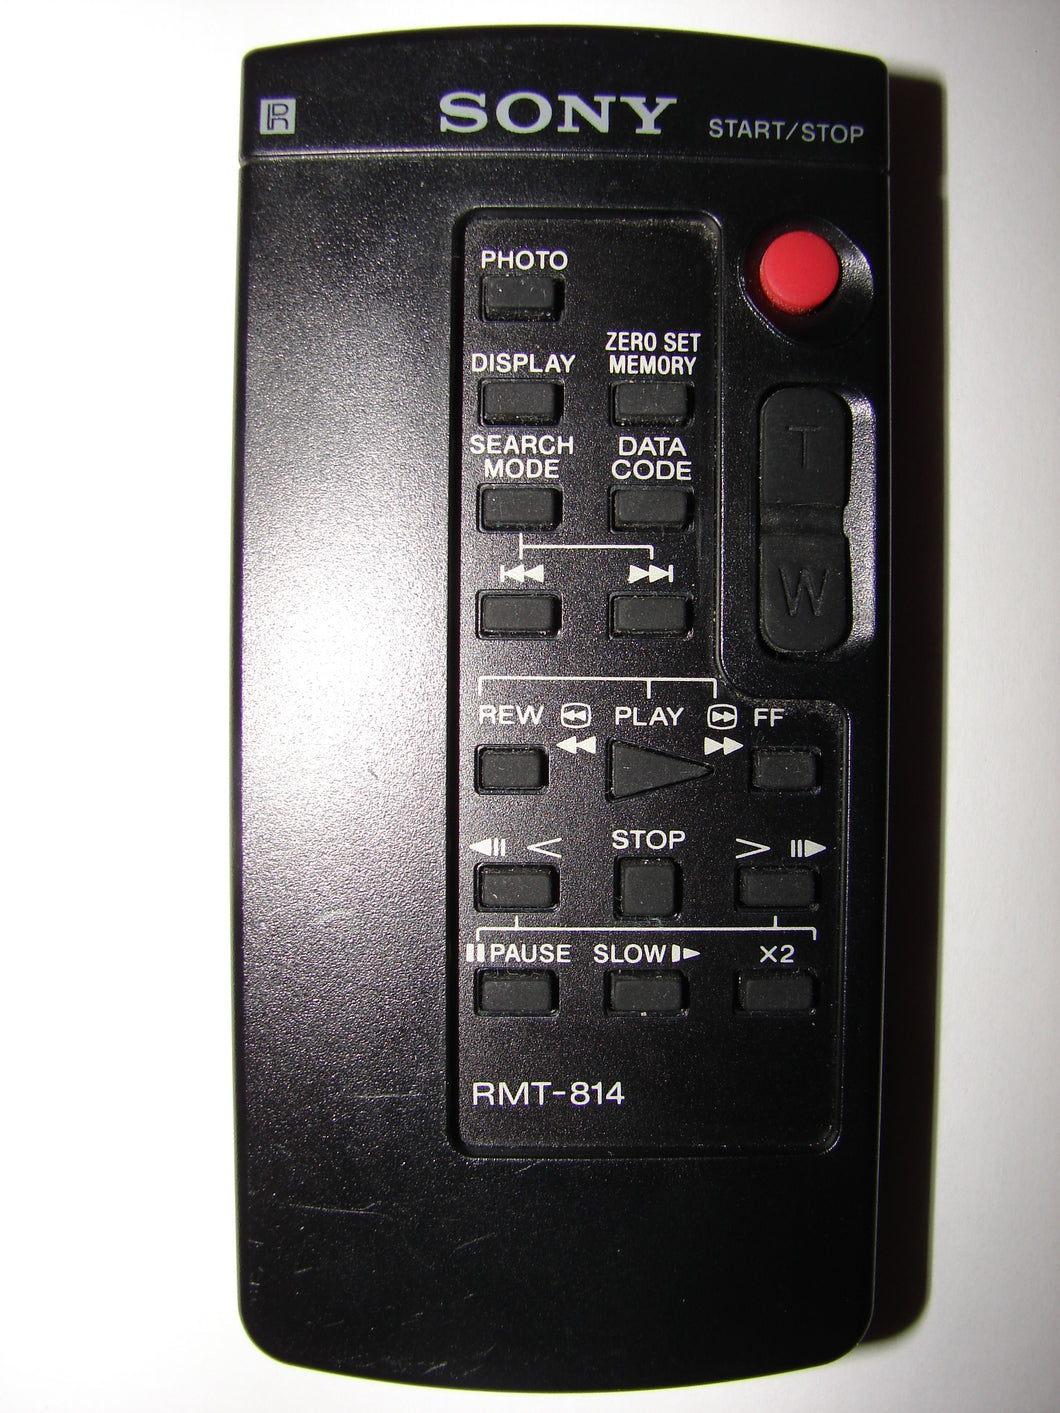 RMT-814 Sony Remote Control for Video Camera / Camcorder front view